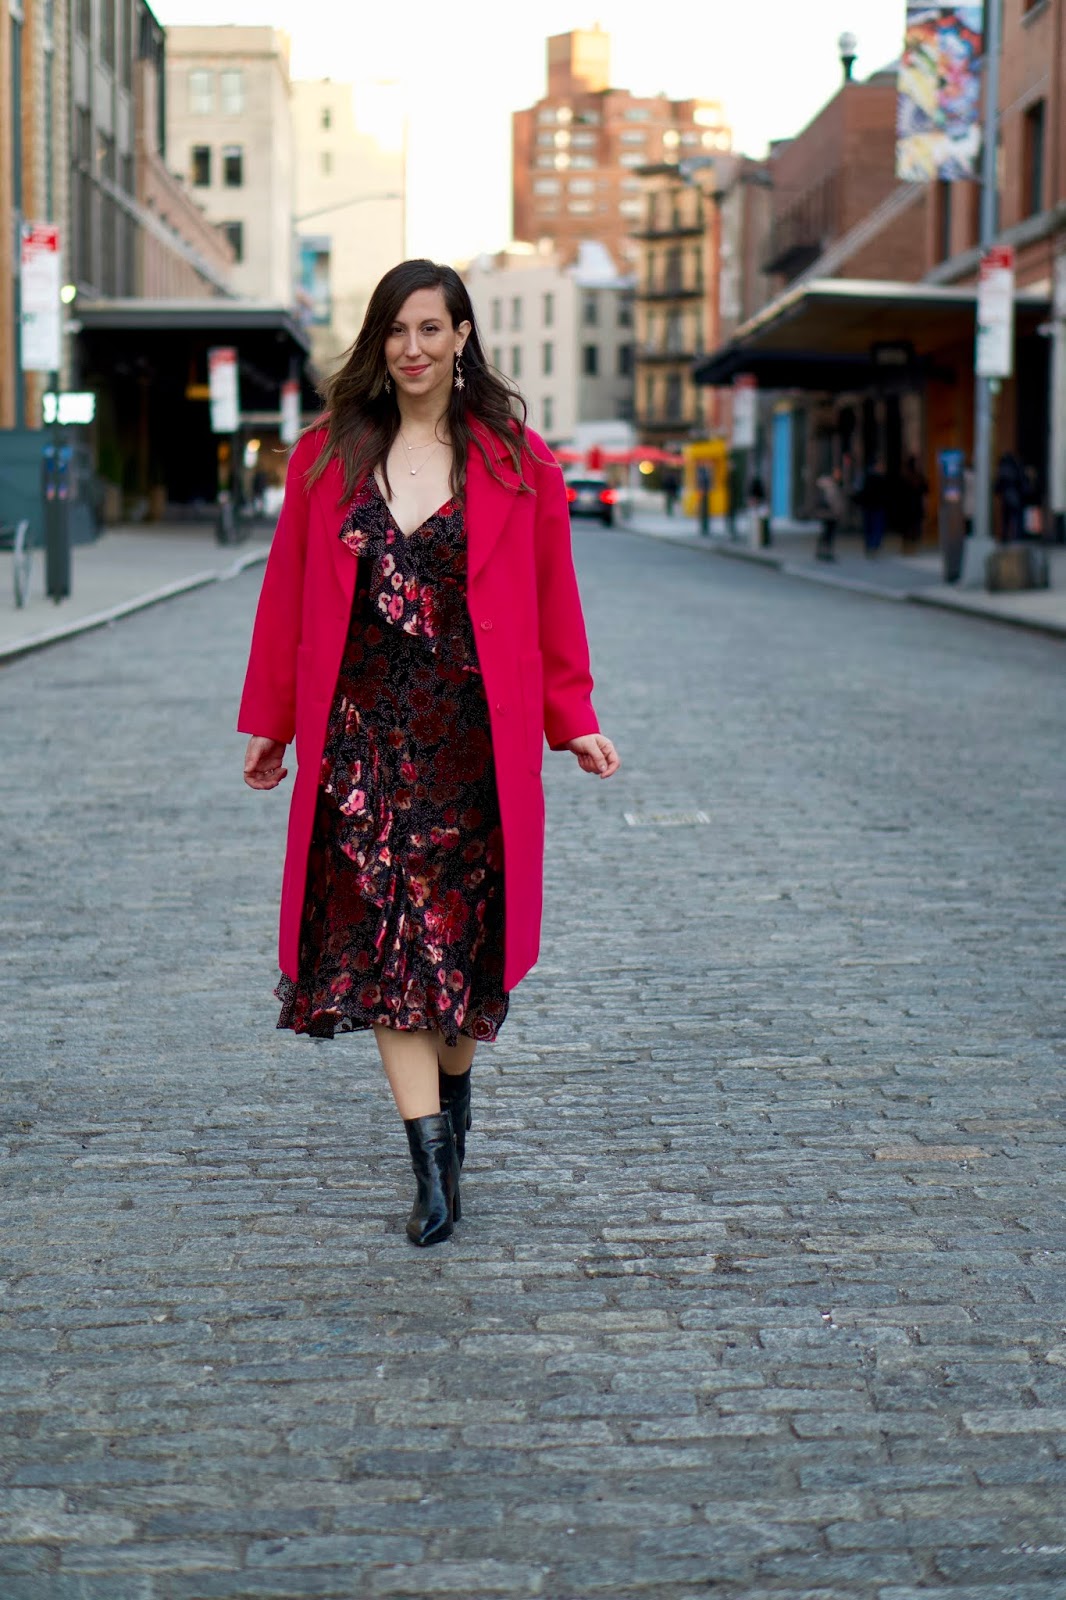 Perfect in Pink: 10 Pink Wool Coats for Winter | FASHinNY